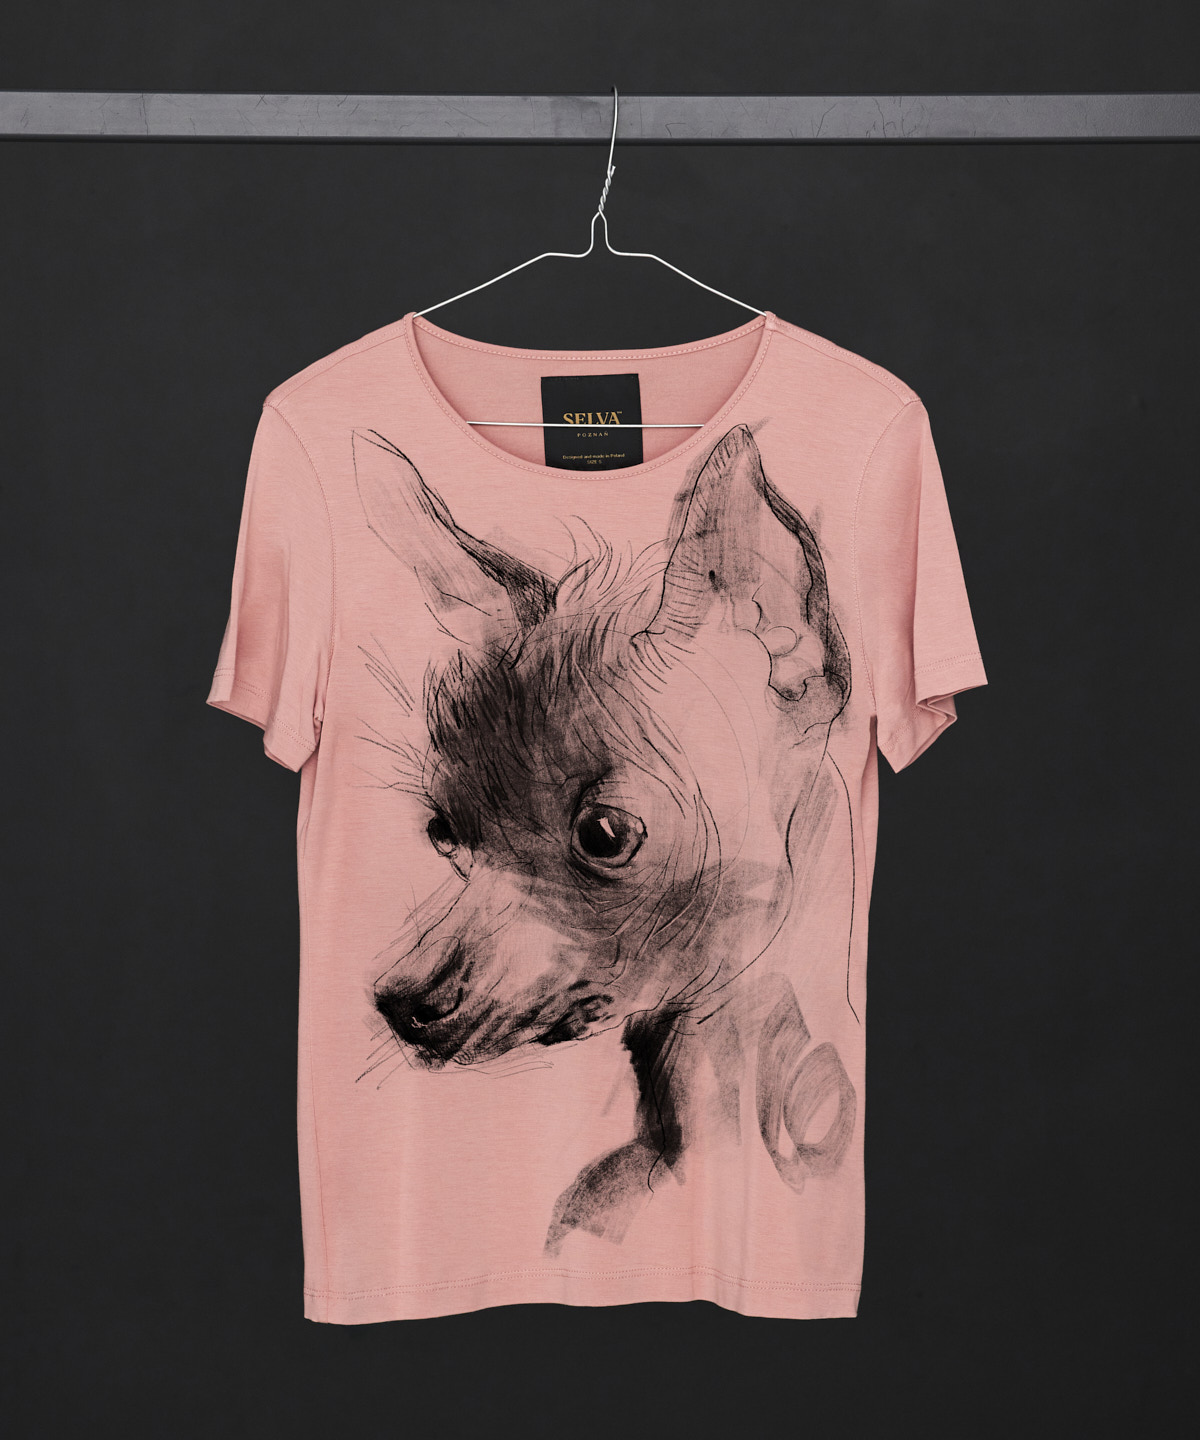 Chinese Crested Dog light pink t-shirt woman